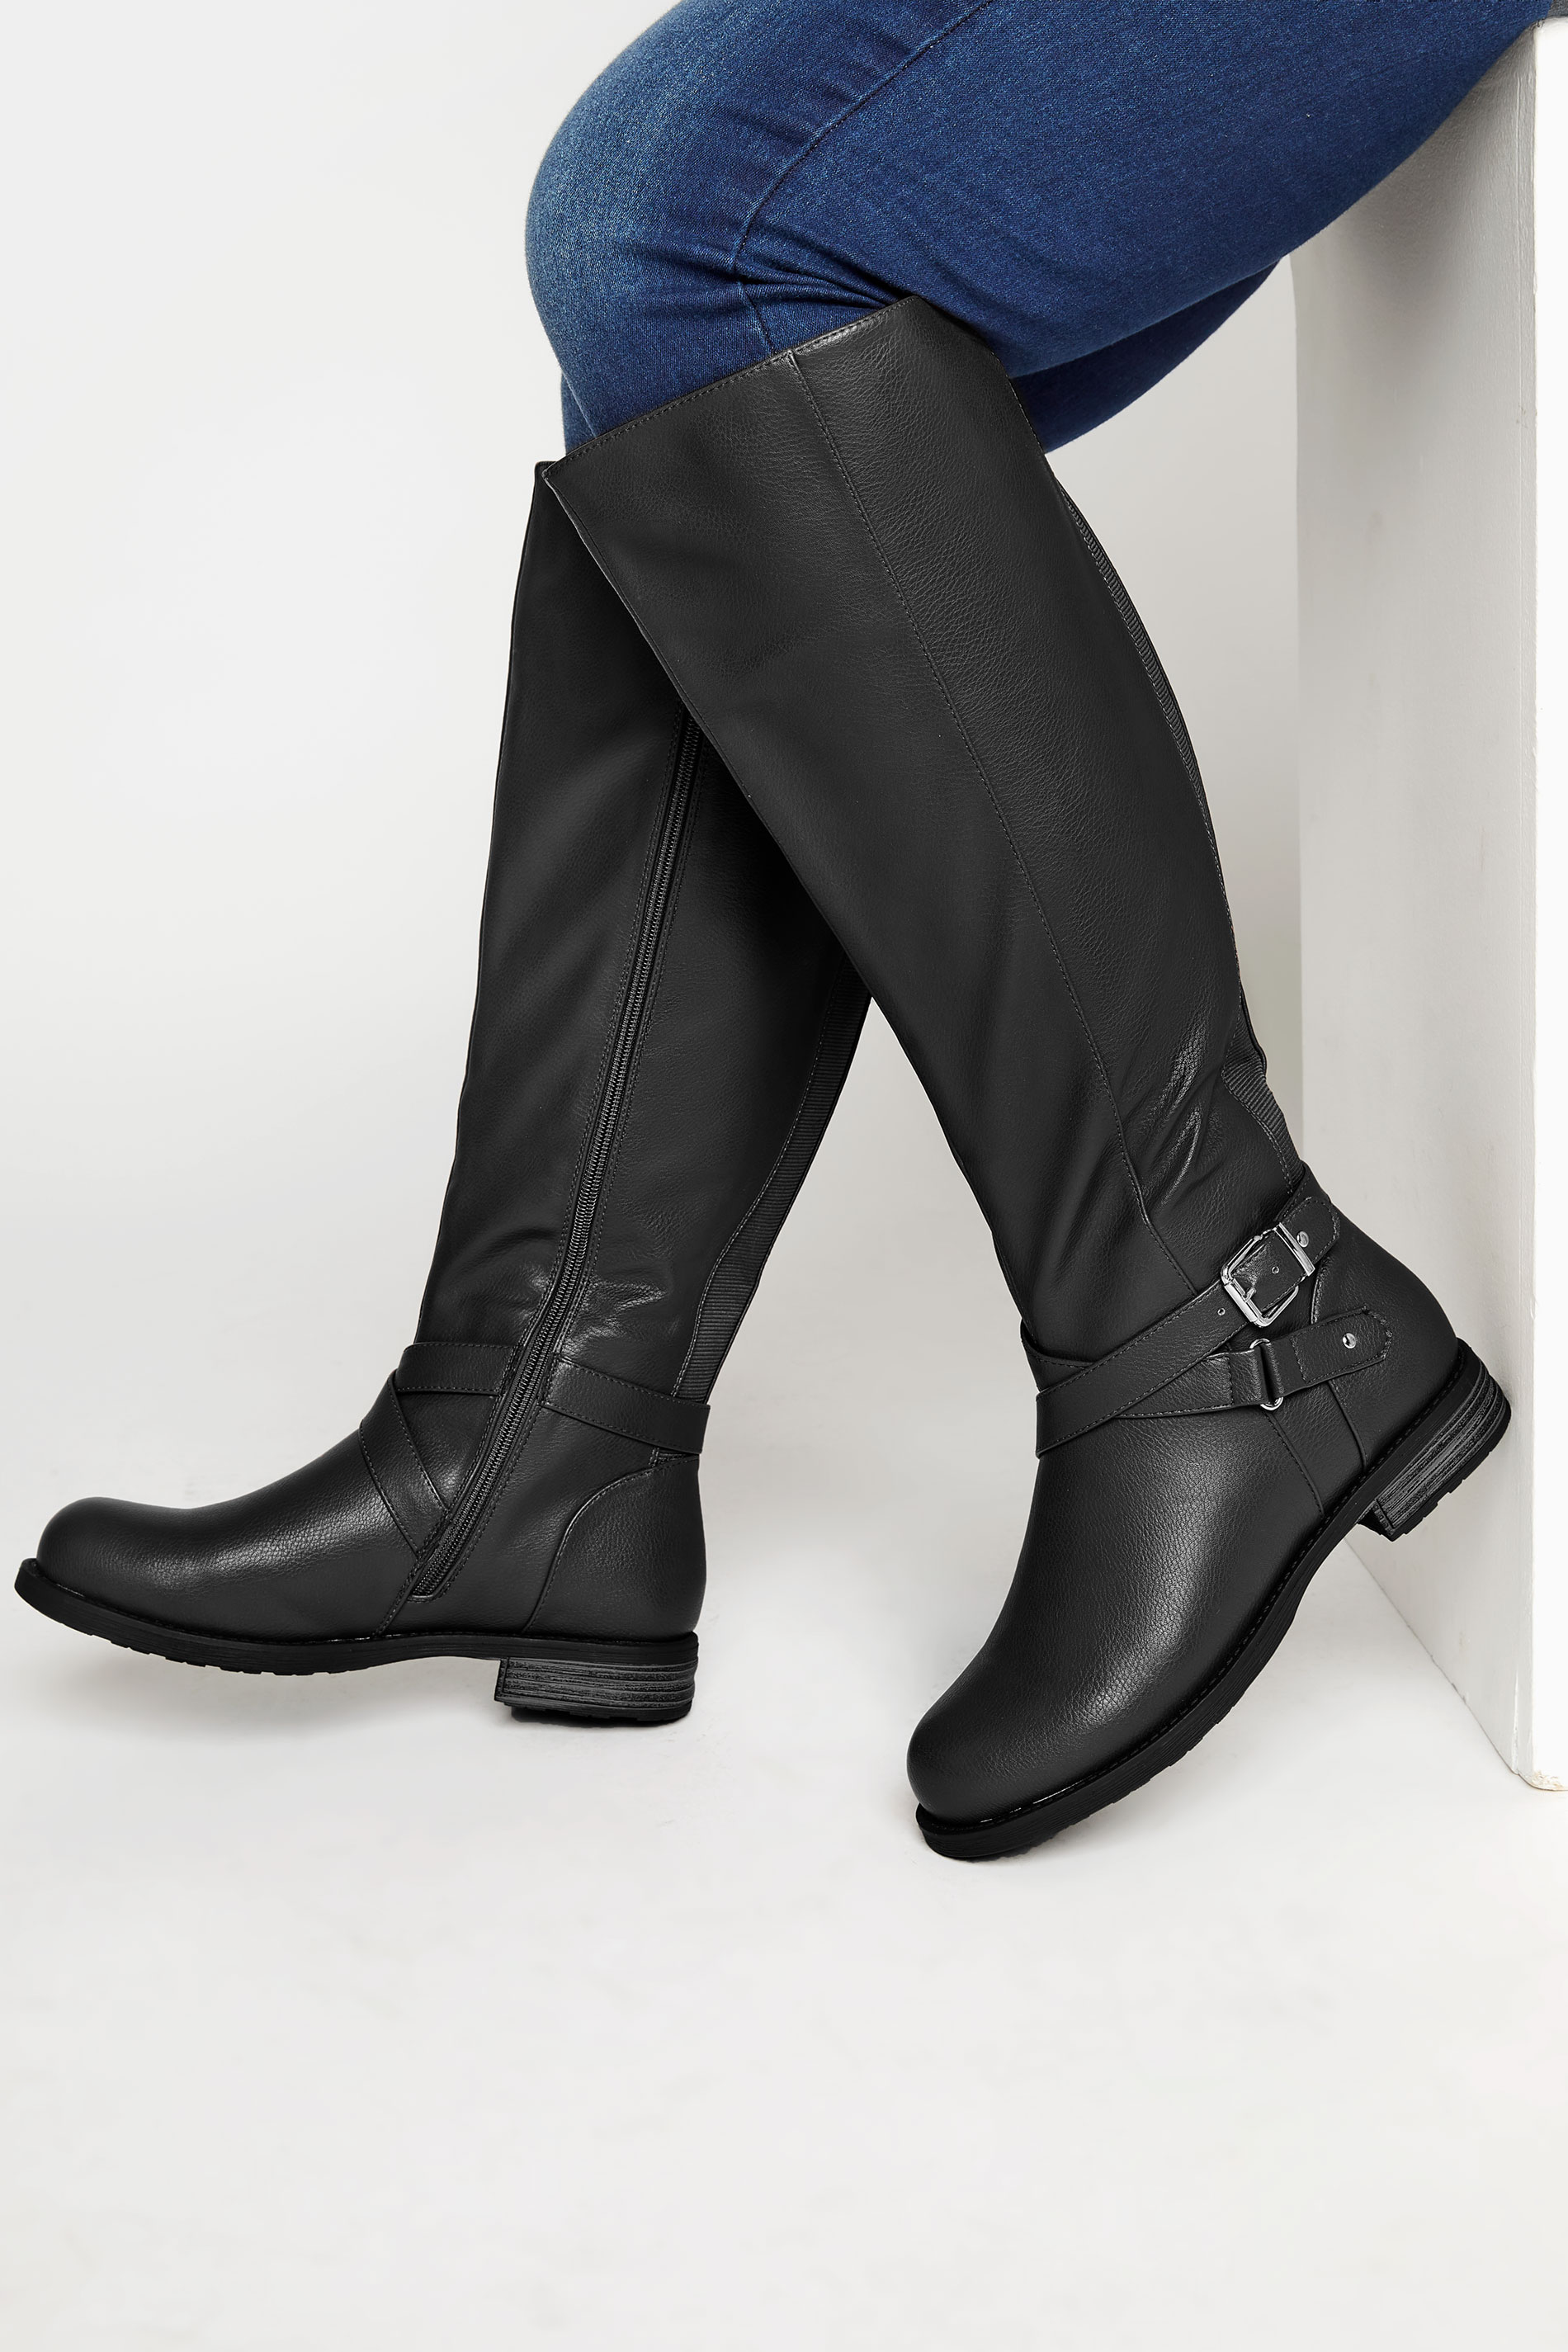 Black Faux Leather Knee High Boots In Wide E Fit & Extra Wide EEE Fit | Yours Clothing 1